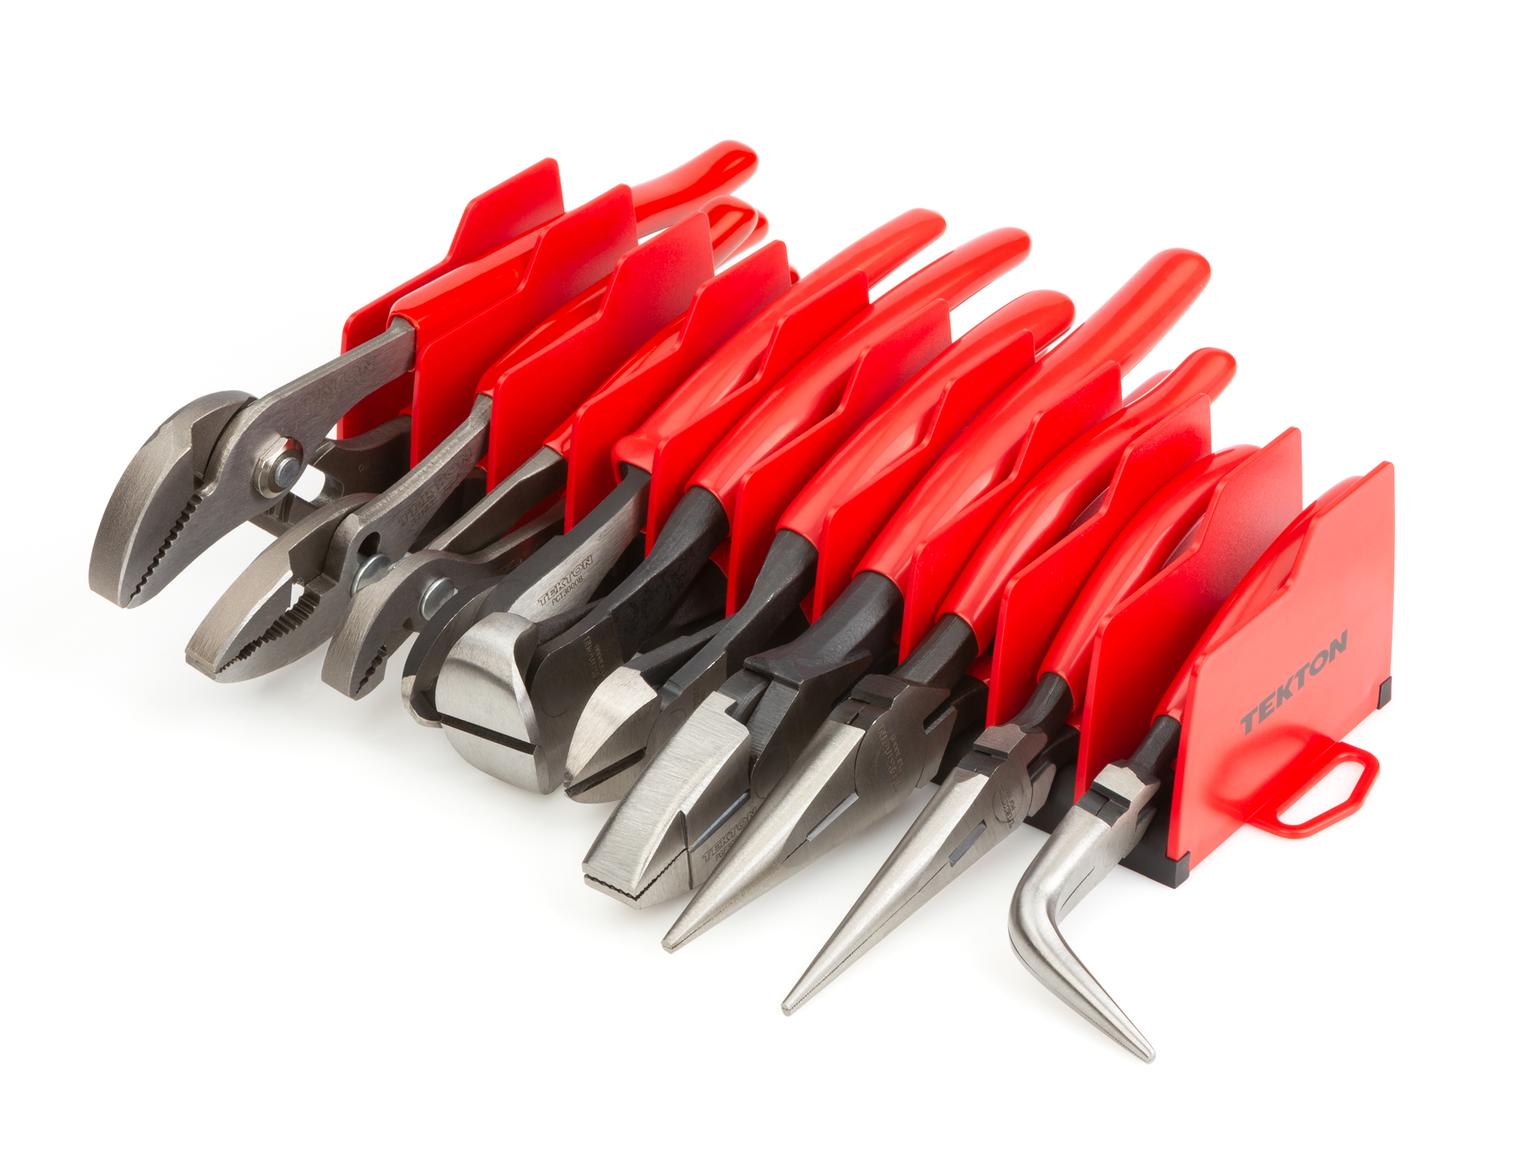 TEKTON PLR99201-T Gripping and Cutting Pliers Set with Rack (10-Piece)